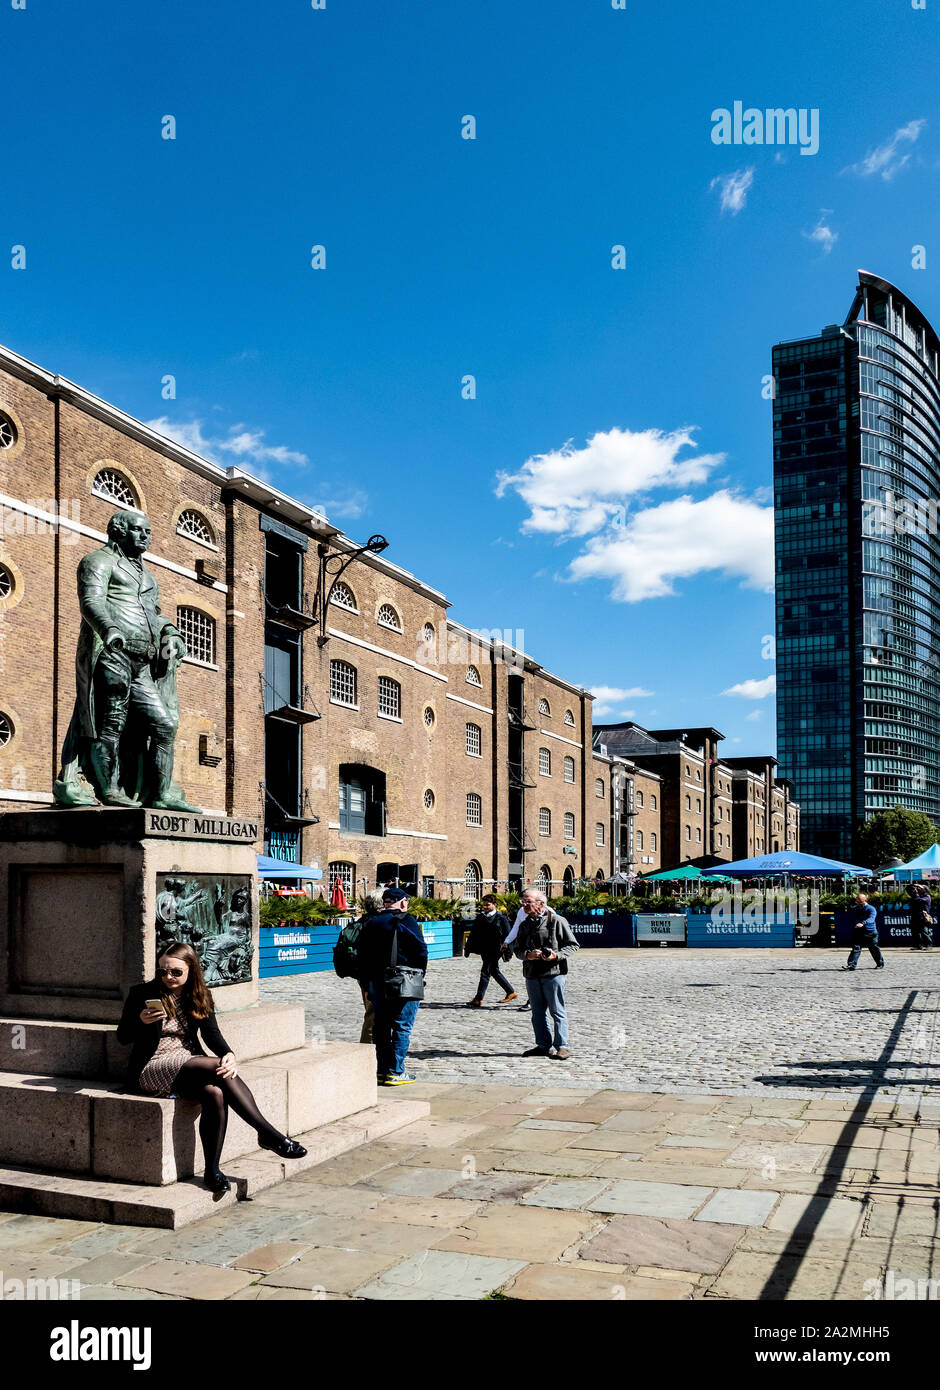 The statue of Robert Milligan, the founder of West India Docks, in Canary Wharf, with  the refurbished original warehouses in background Stock Photo